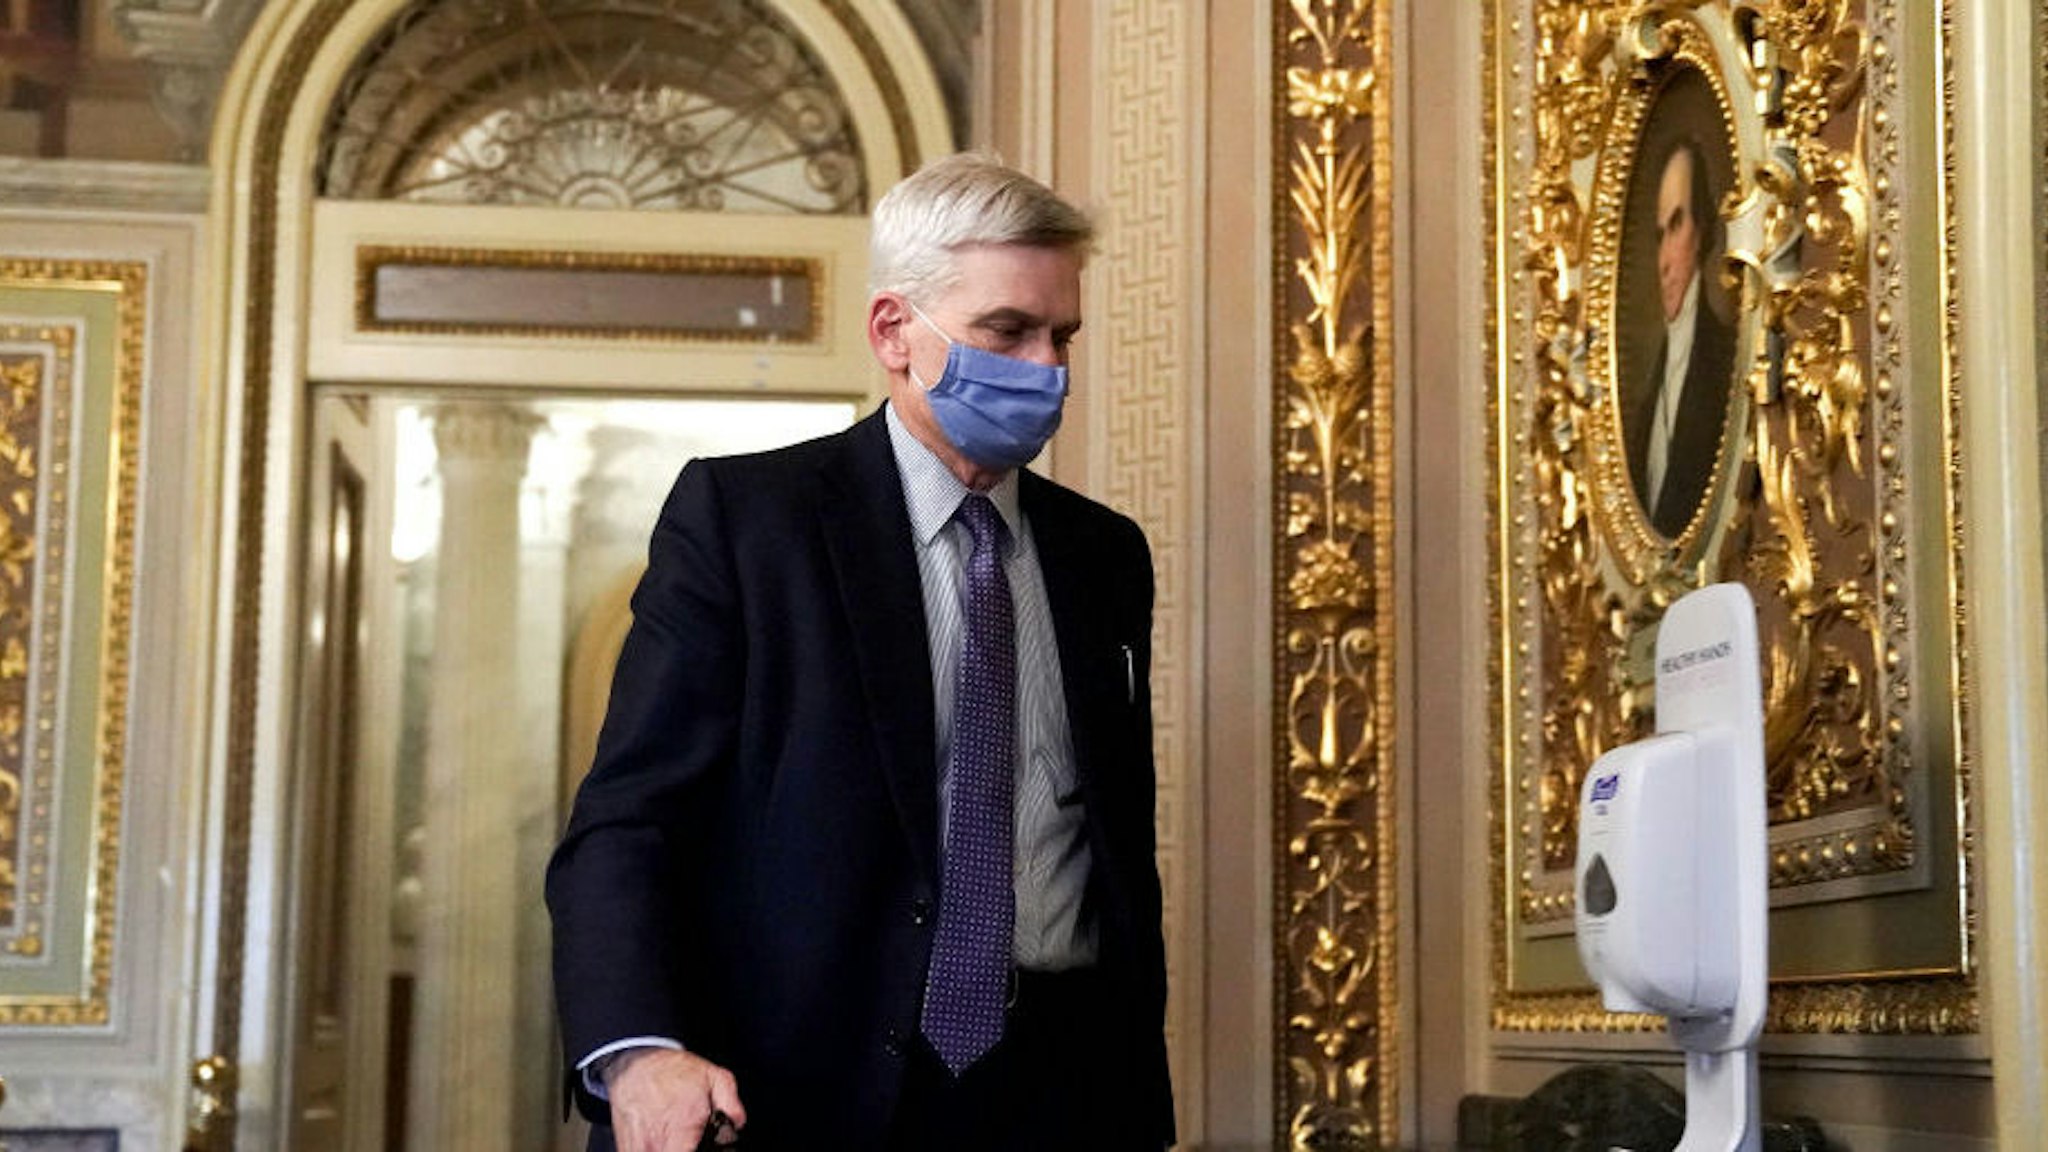 WASHINGTON, DC - FEBRUARY 13: Sen. Bill Cassidy (R-LA.) is seen in the Senate Reception Room during the fifth day of the impeachment trial of former President Donald Trump on Capitol Hill on February 13, 2021 in Washington, DC. The Senate voted 57-43 to acquit Trump of the charges of inciting the January 6 attack on the U.S. Capitol.